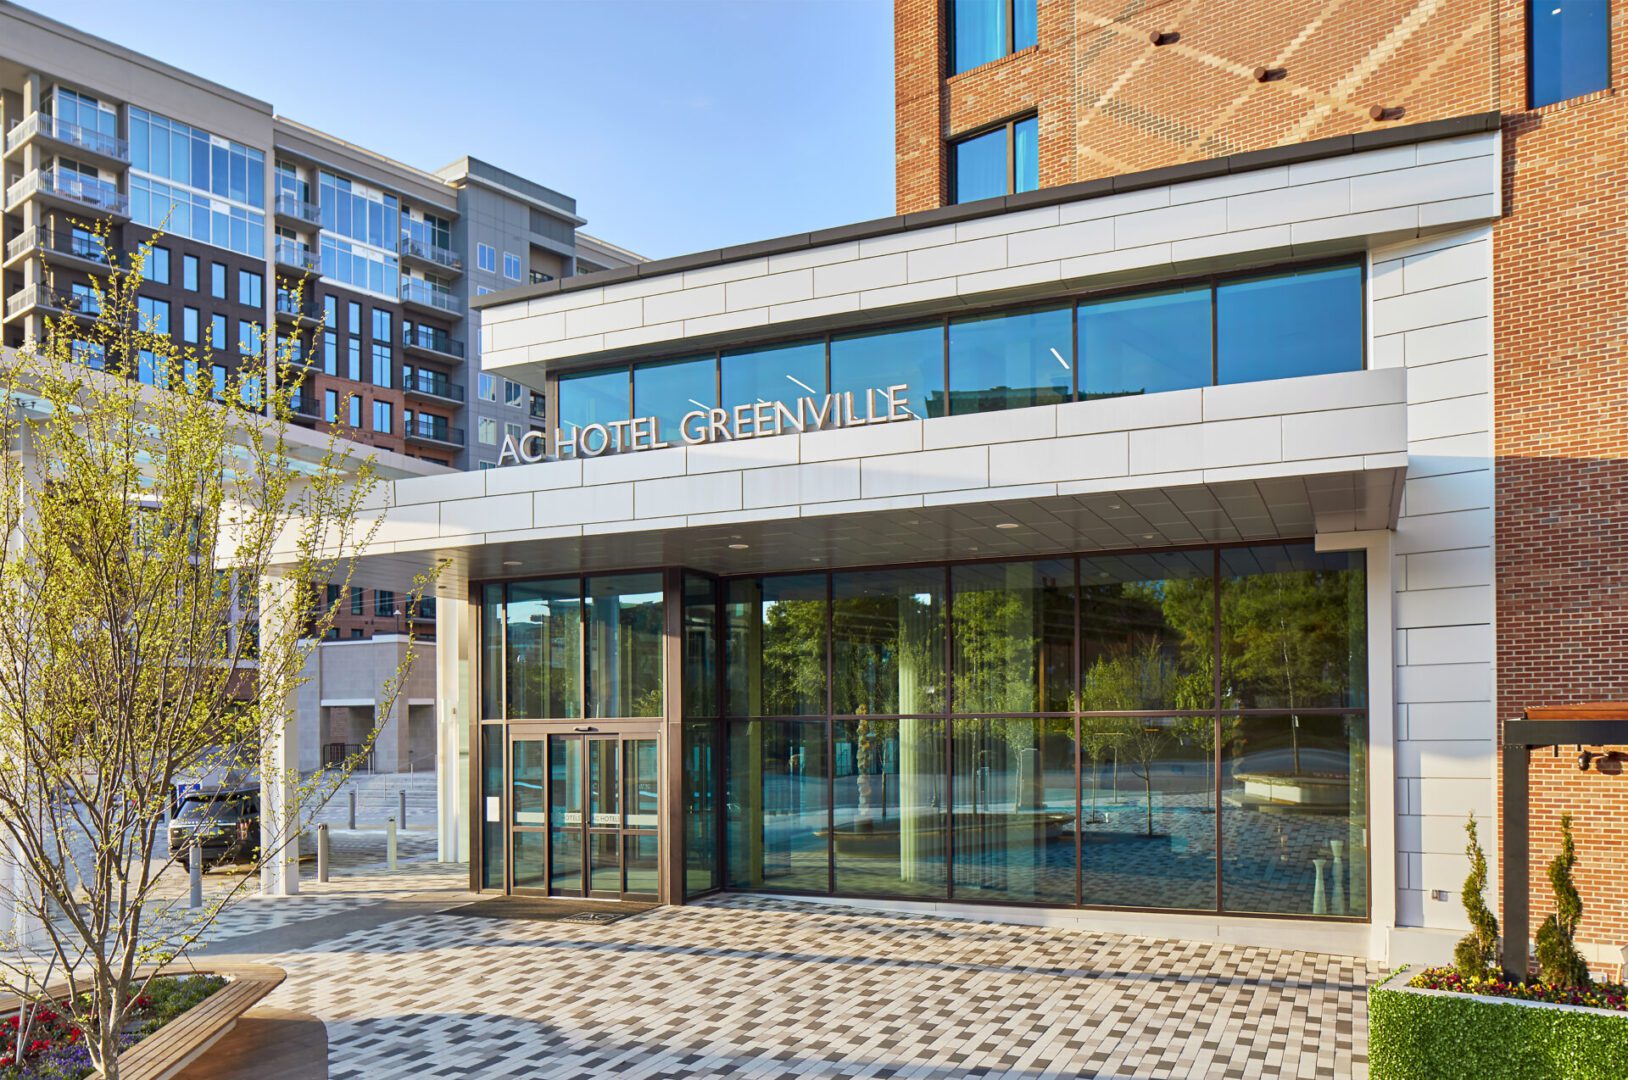 AC Hotel Greenville, Hospitality Architecture